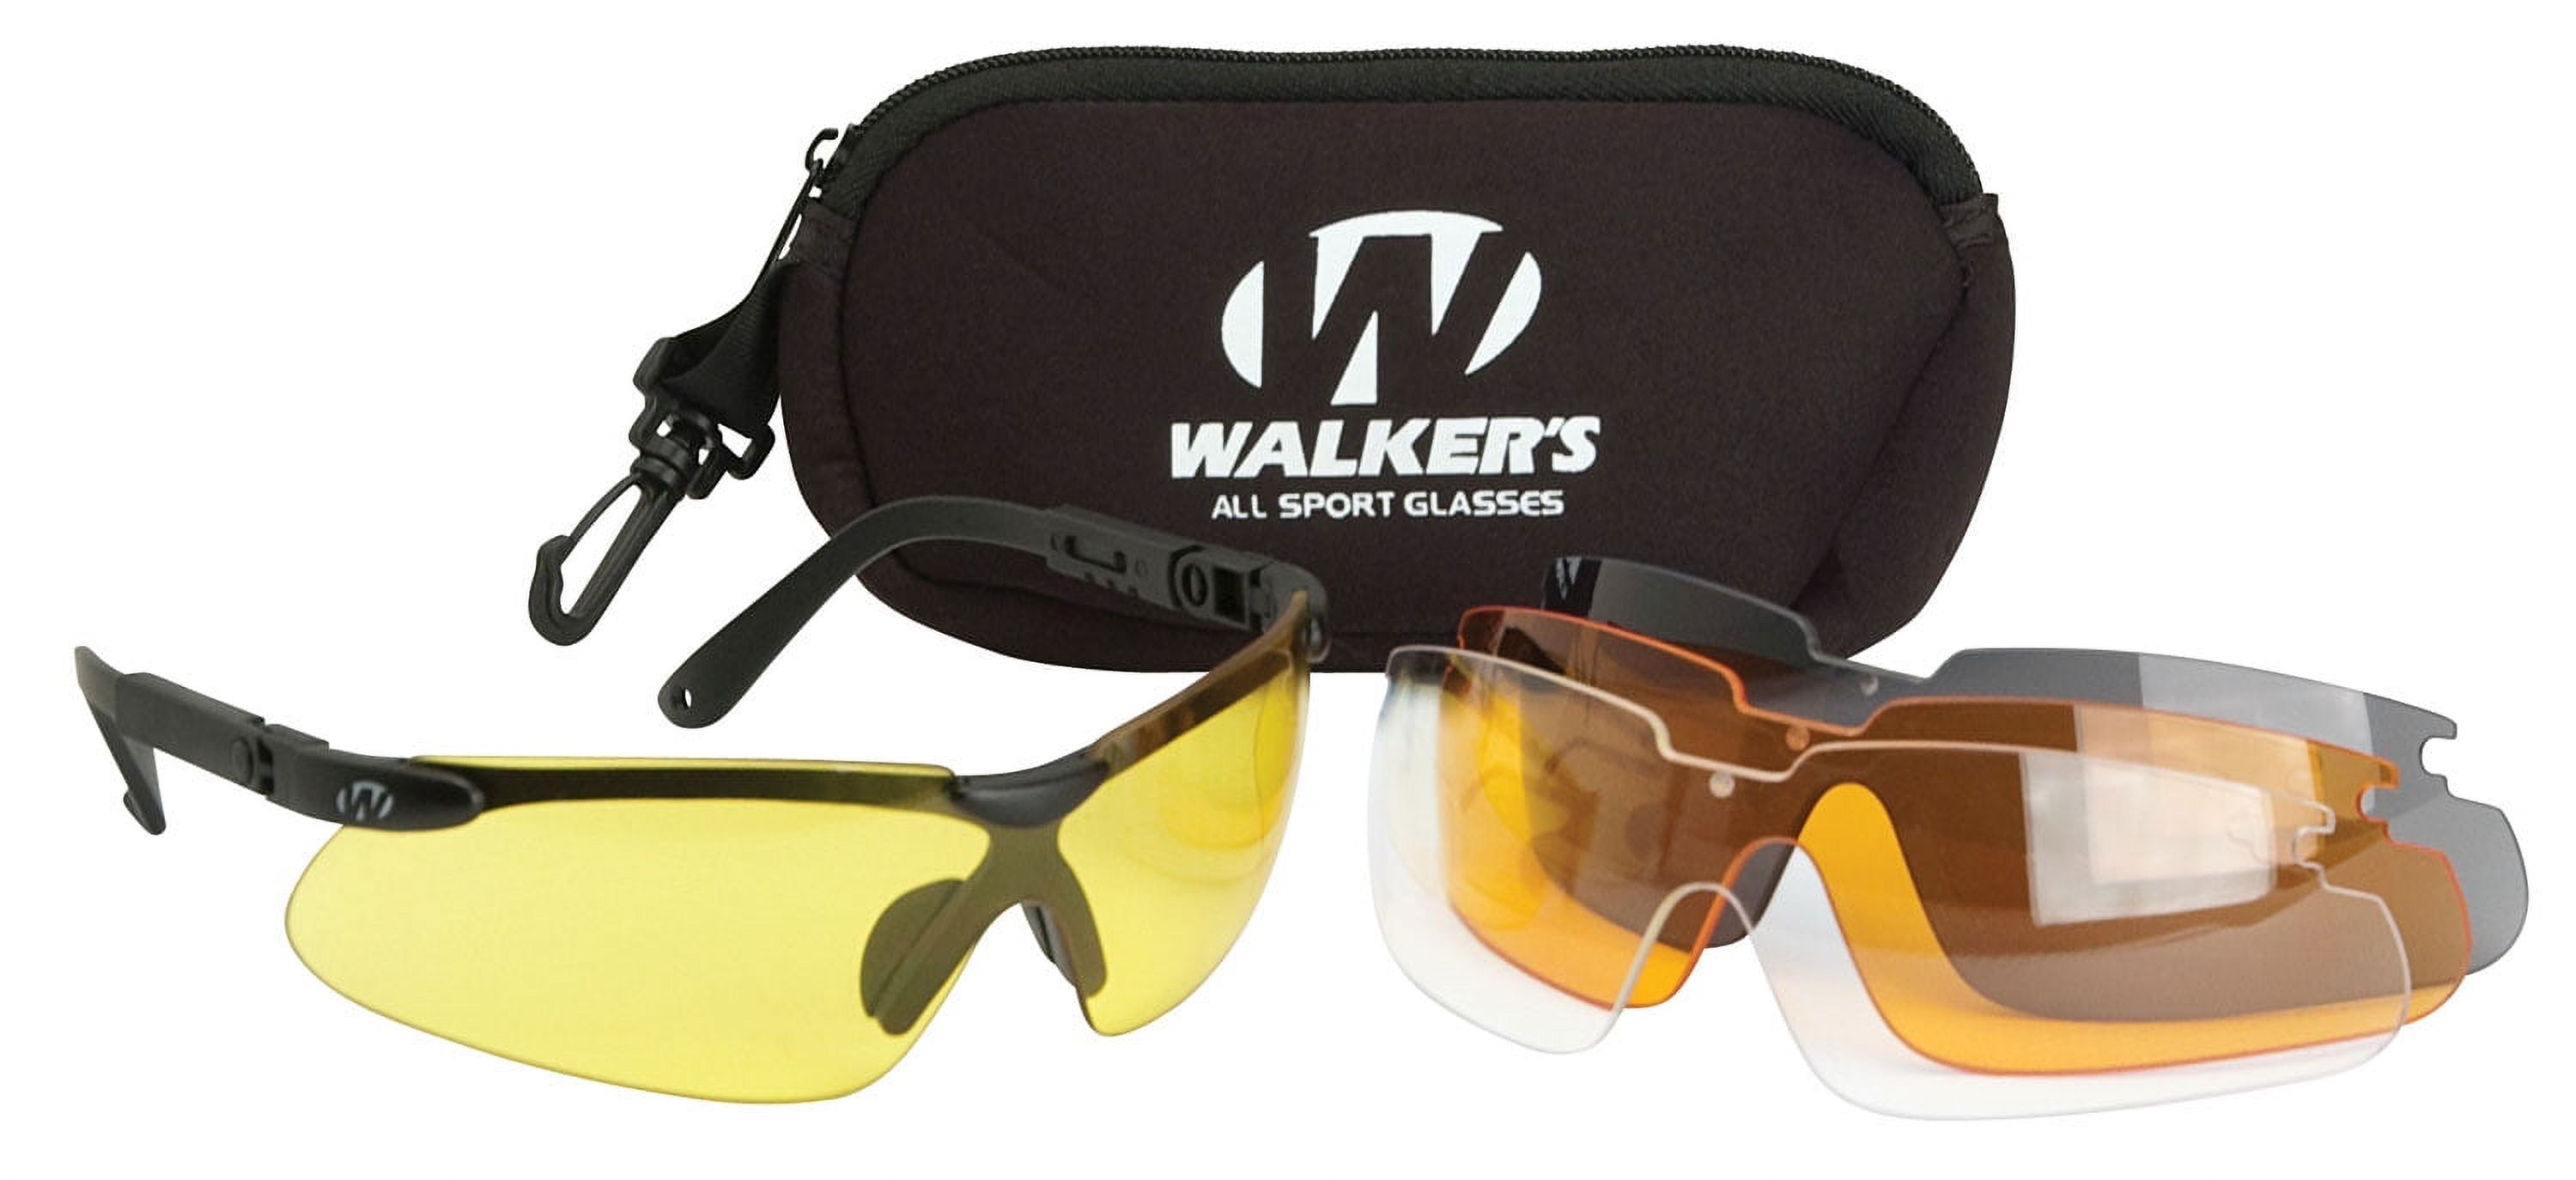 Walkers GWPASG4L2 Sport Glasses Interchangeable Lens Black Polymer Frame Polycarbonate Lenses Clear/Yellow/Amber/Brown - image 1 of 2